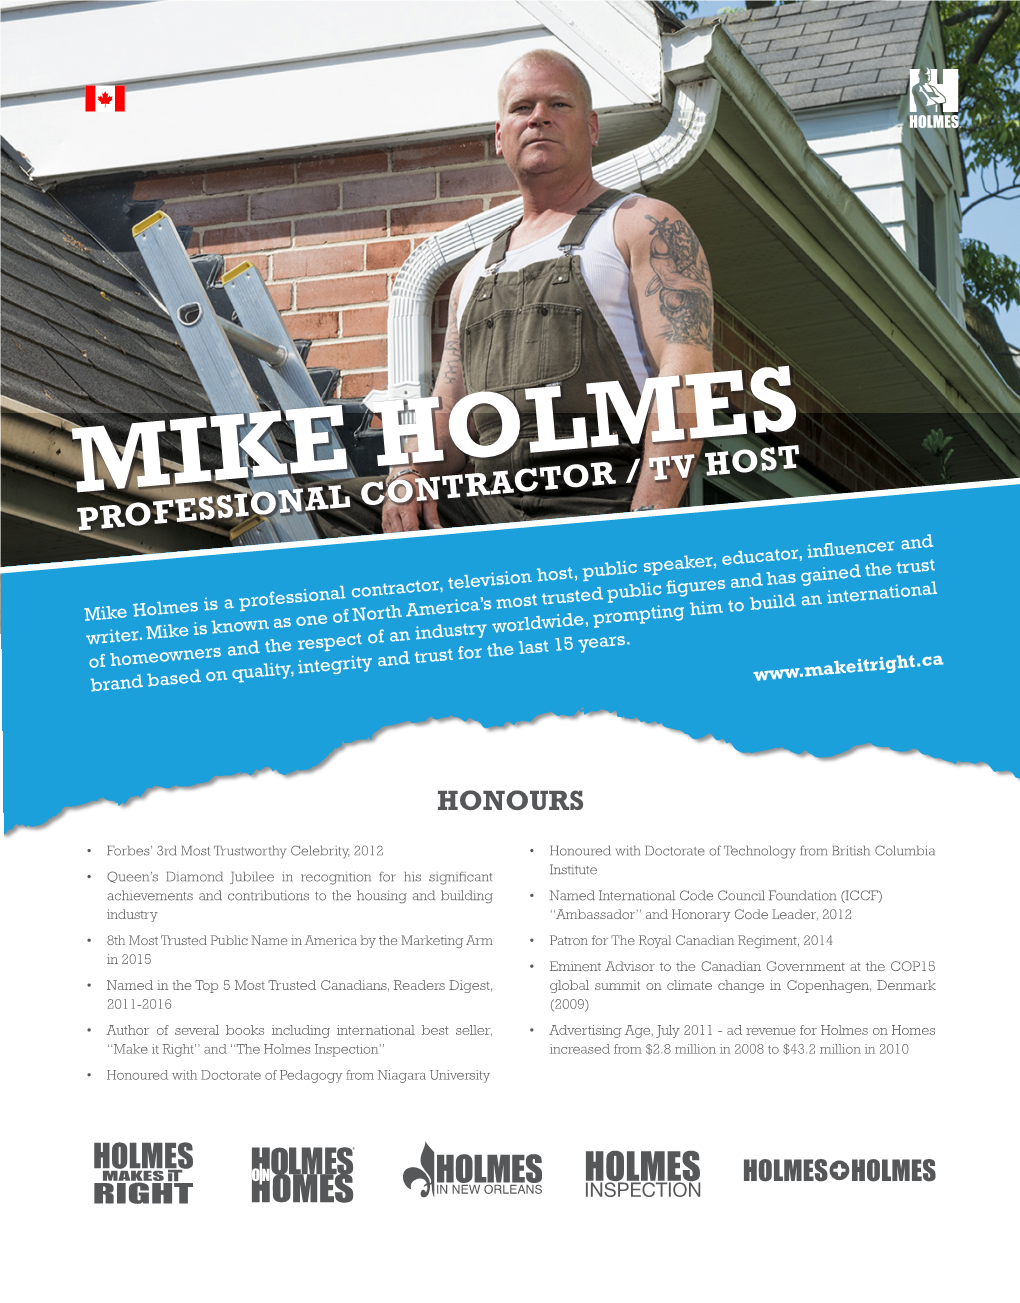 Mike Holmes Professional Contractor / Tv Host